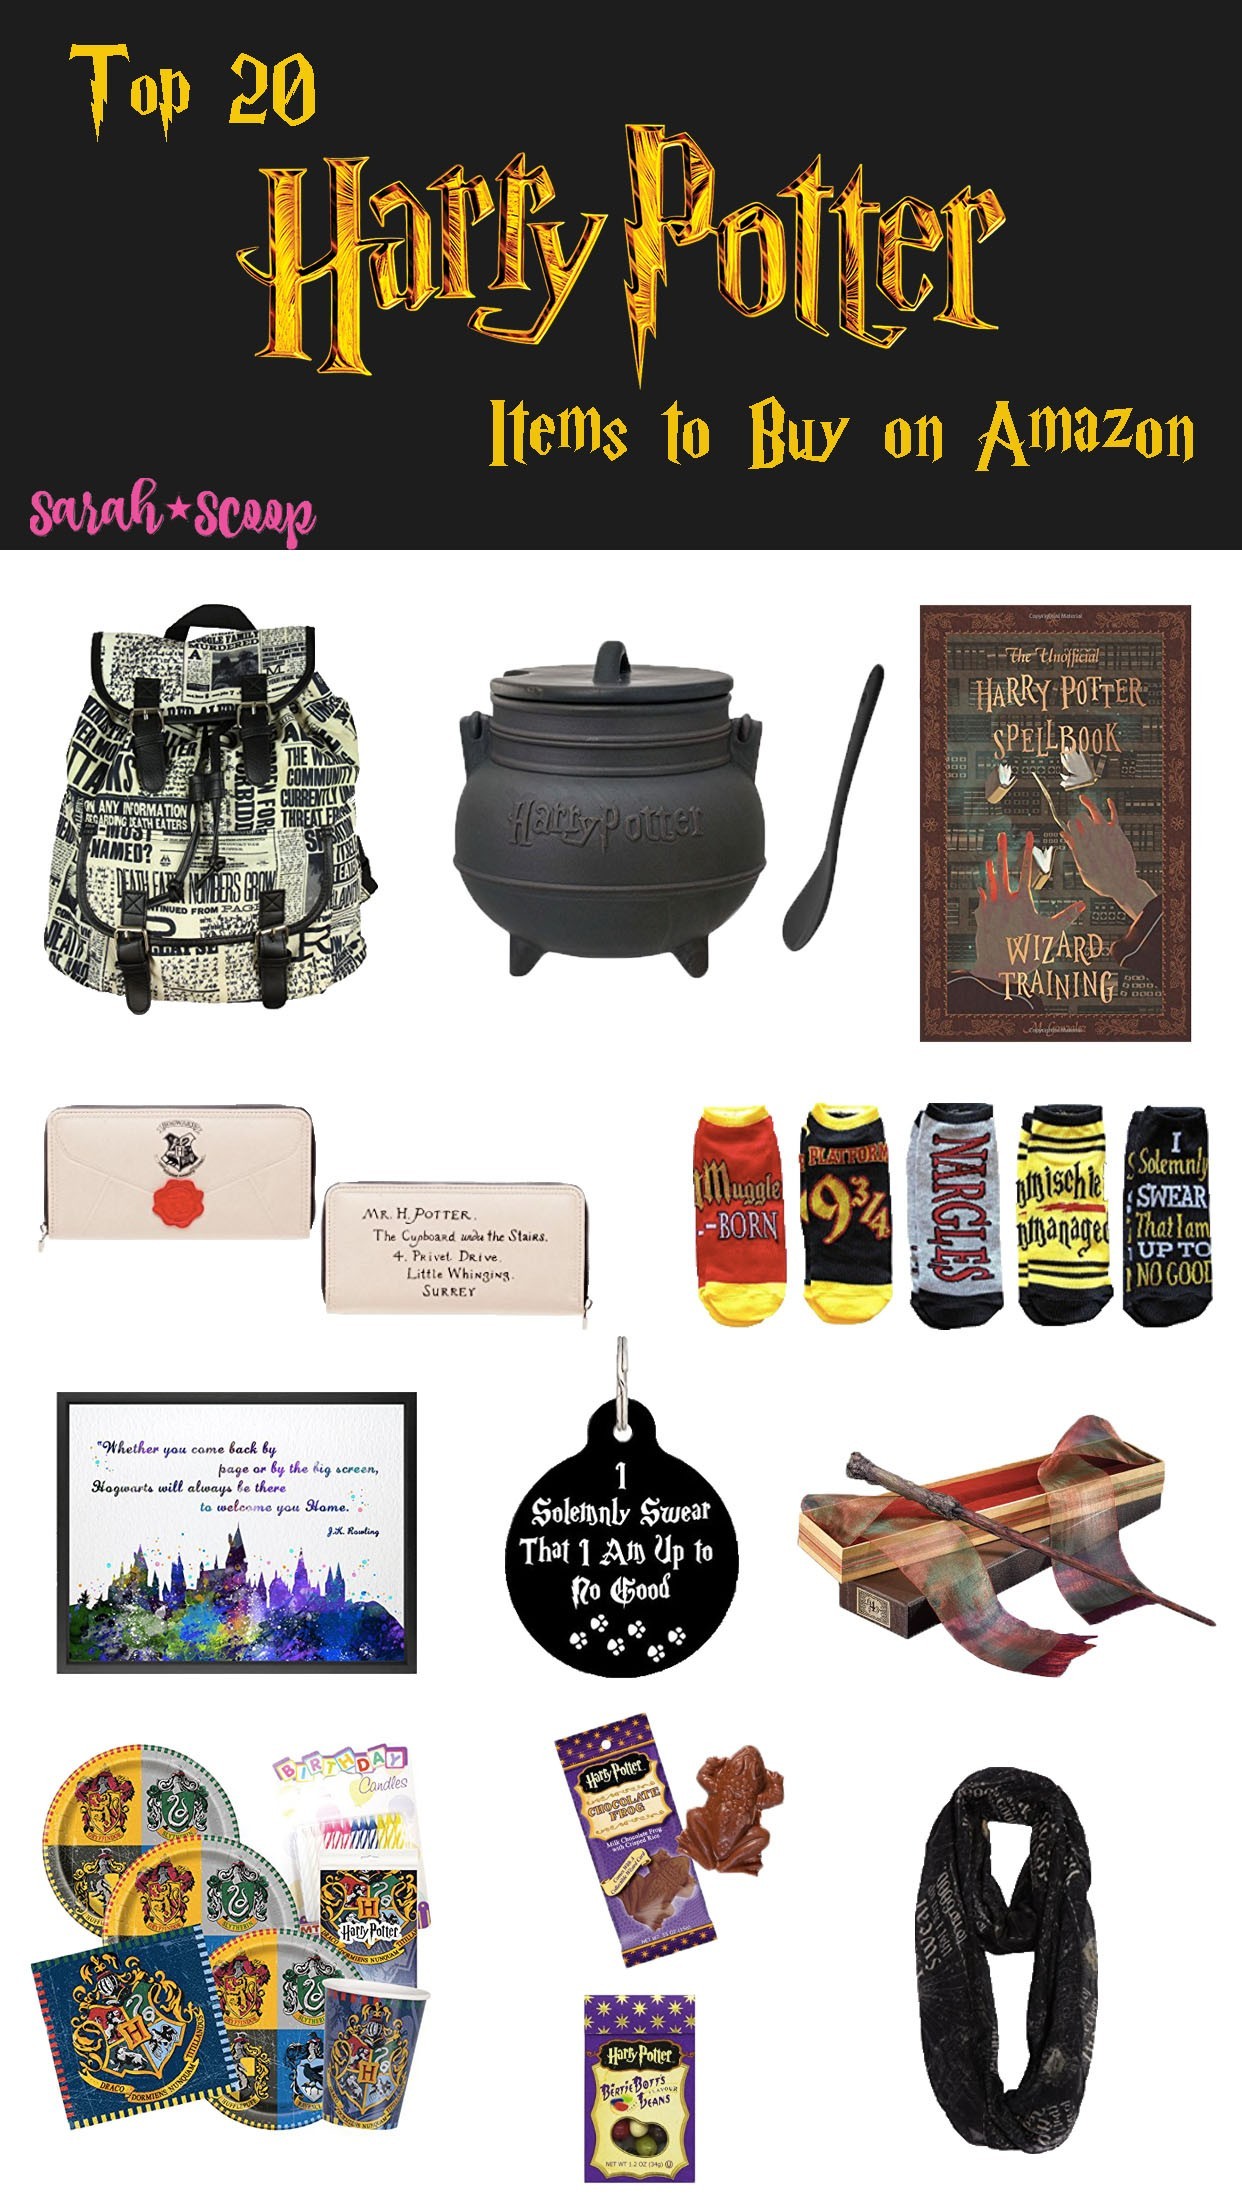 Top 20 Harry Potter Items to Buy on Amazon - Sarah Scoop